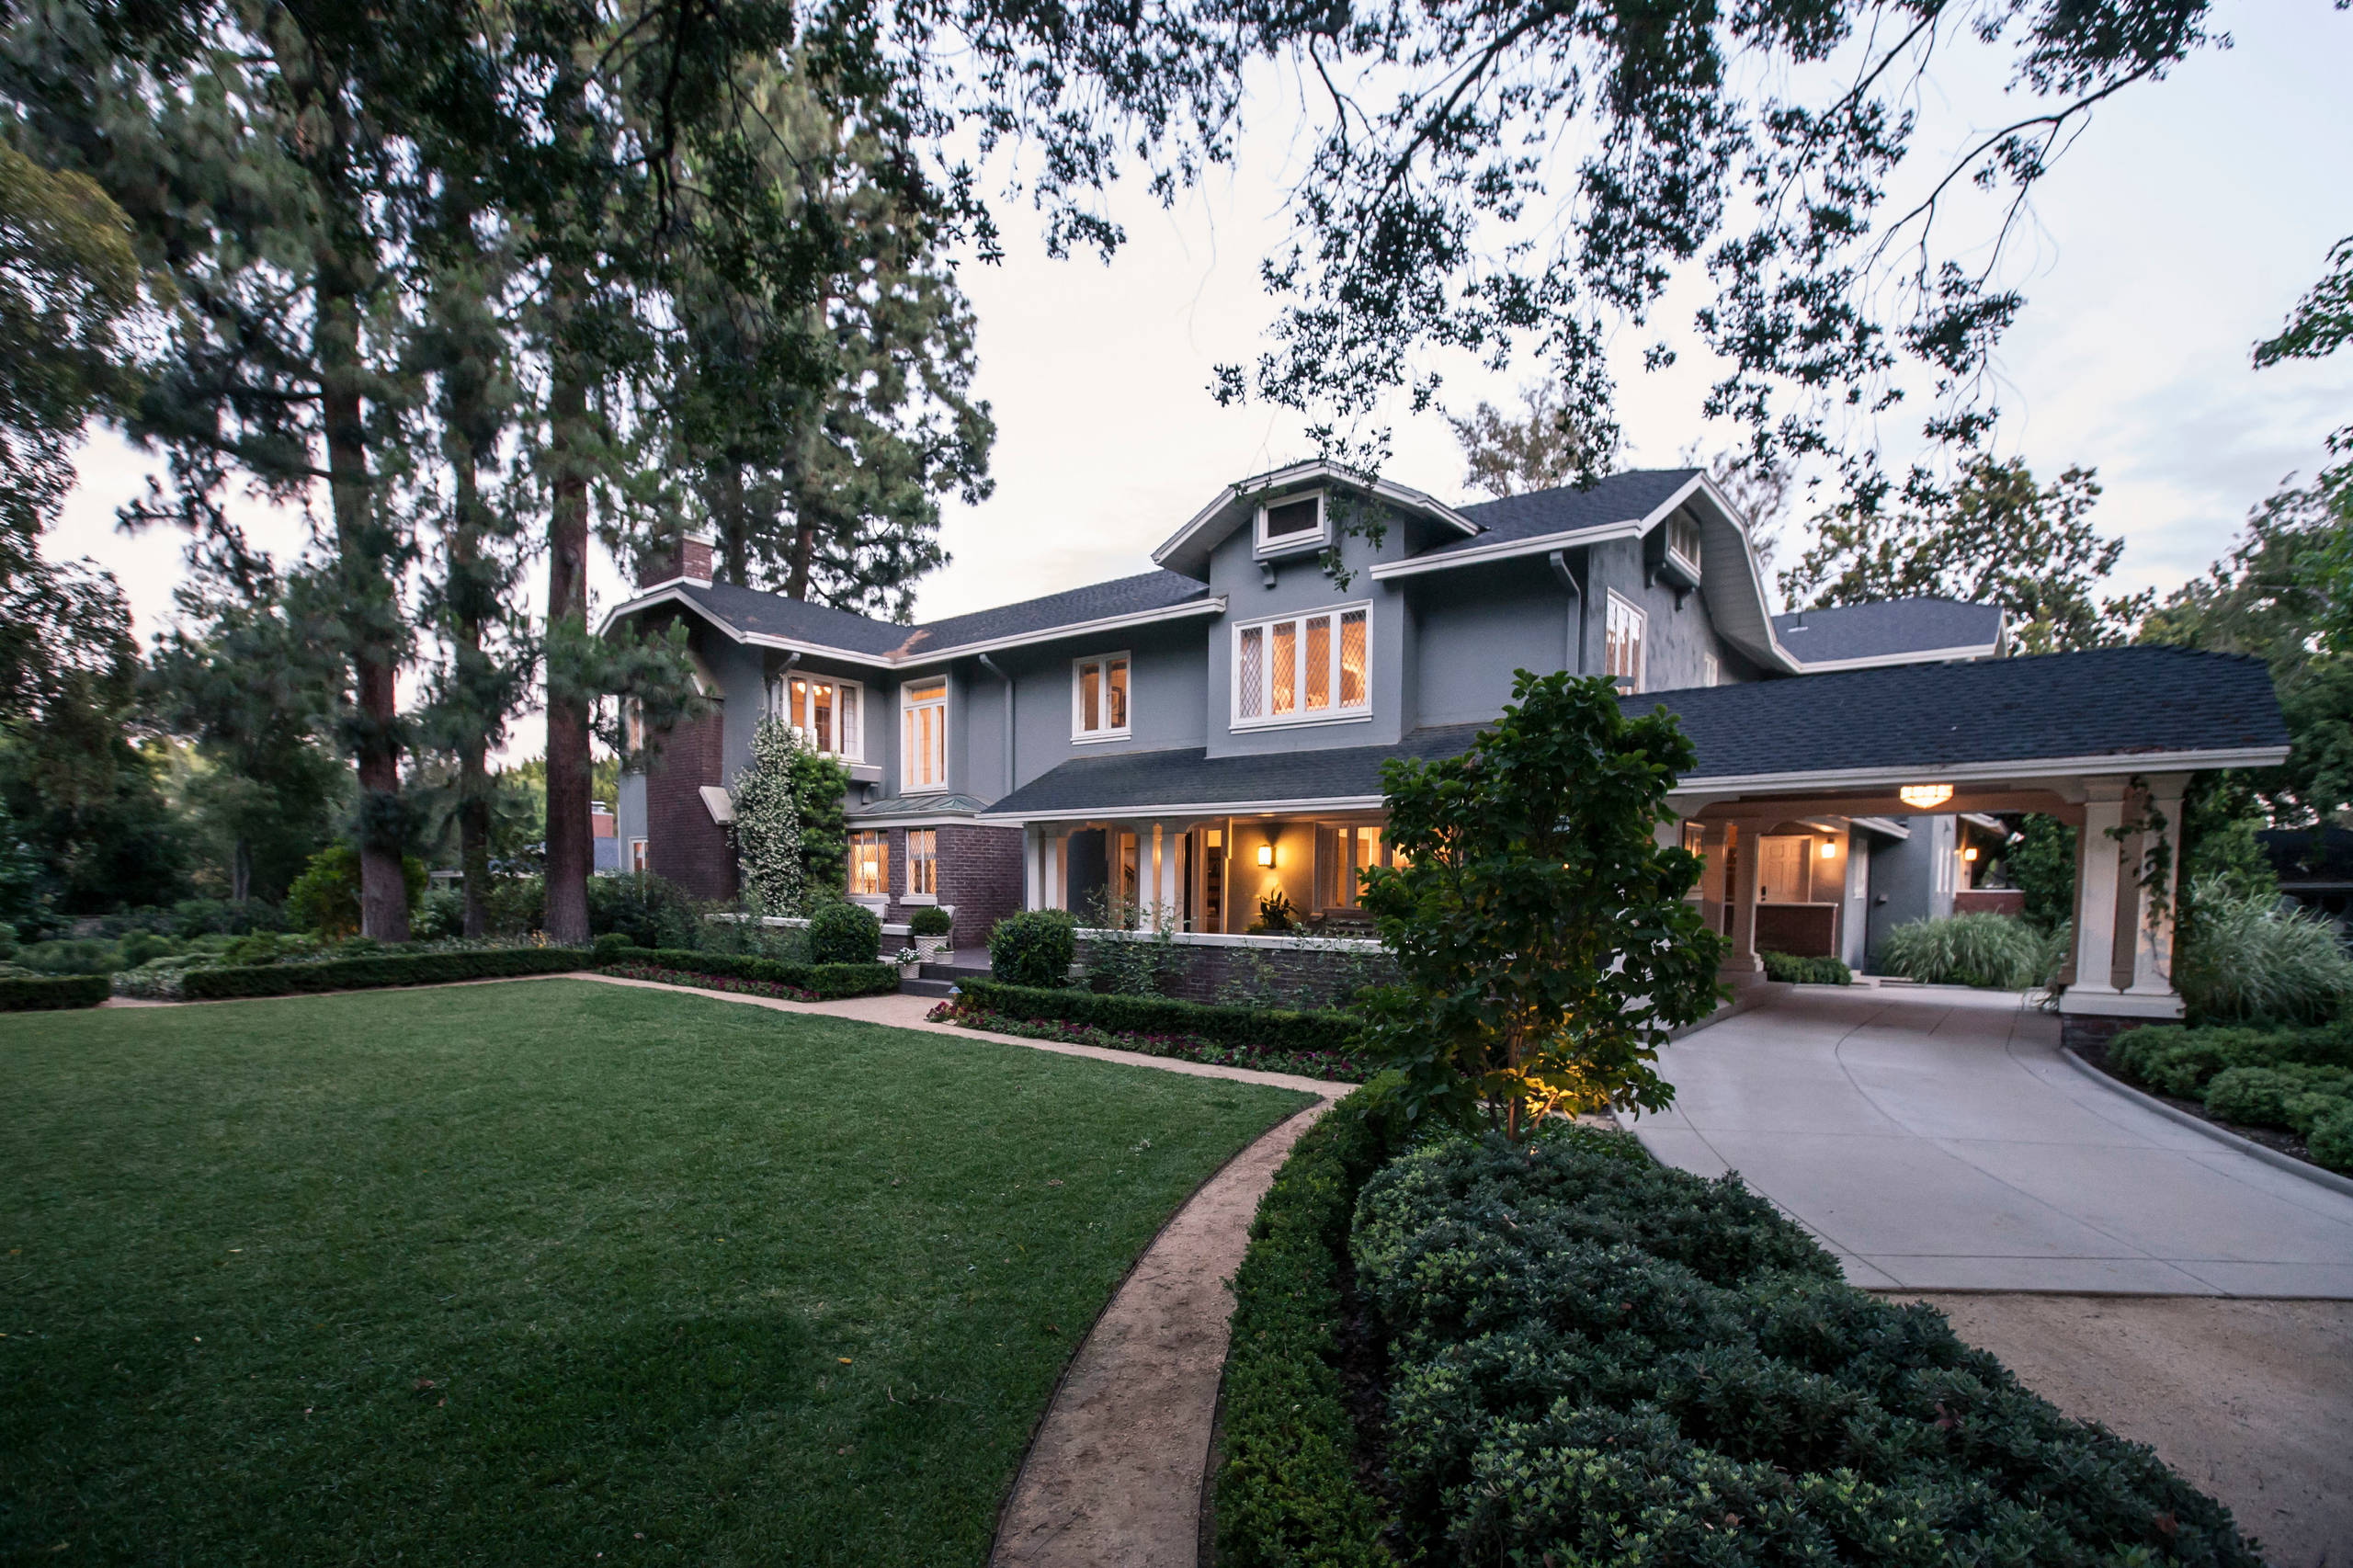 Renovations and Additions to a Historic G. Lawrence Stimson Estate in Pasadena